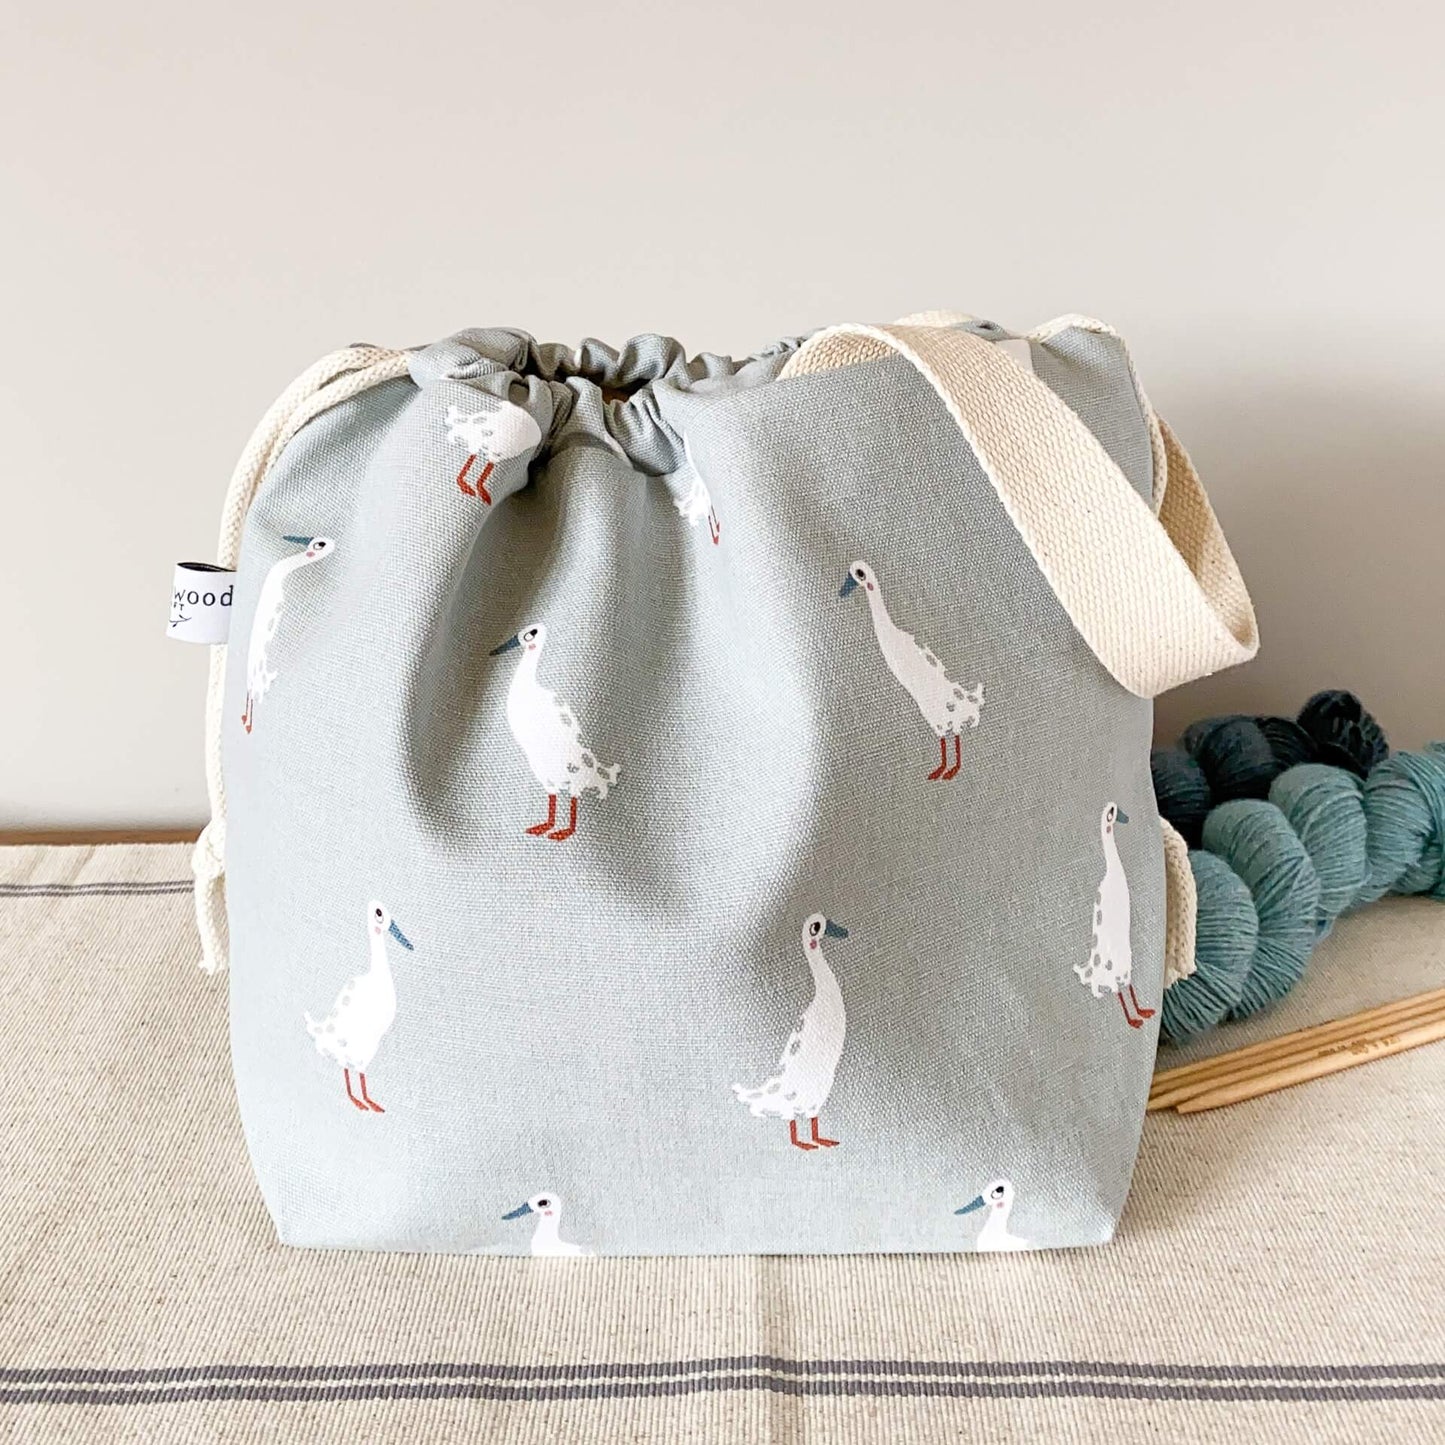 A project bag for knitting projects, made using a fabric showing lots of white runner ducks, sits on a table next to some skeins of yarn. 